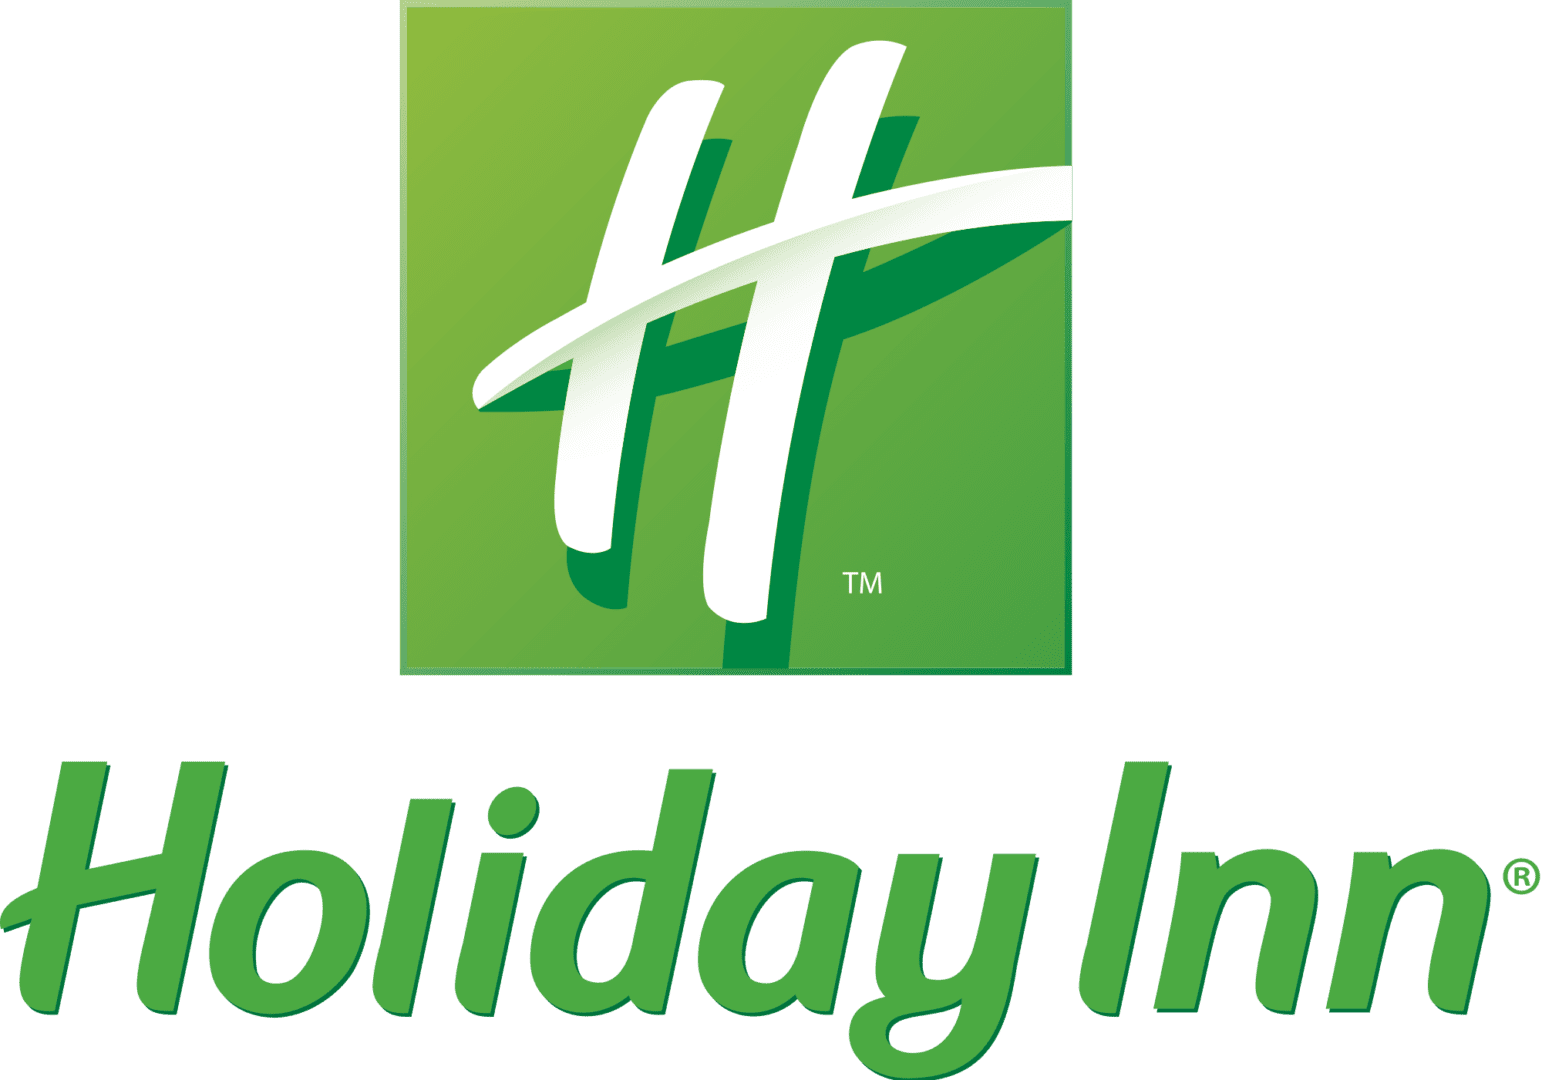 A green and white logo for holiday inn.